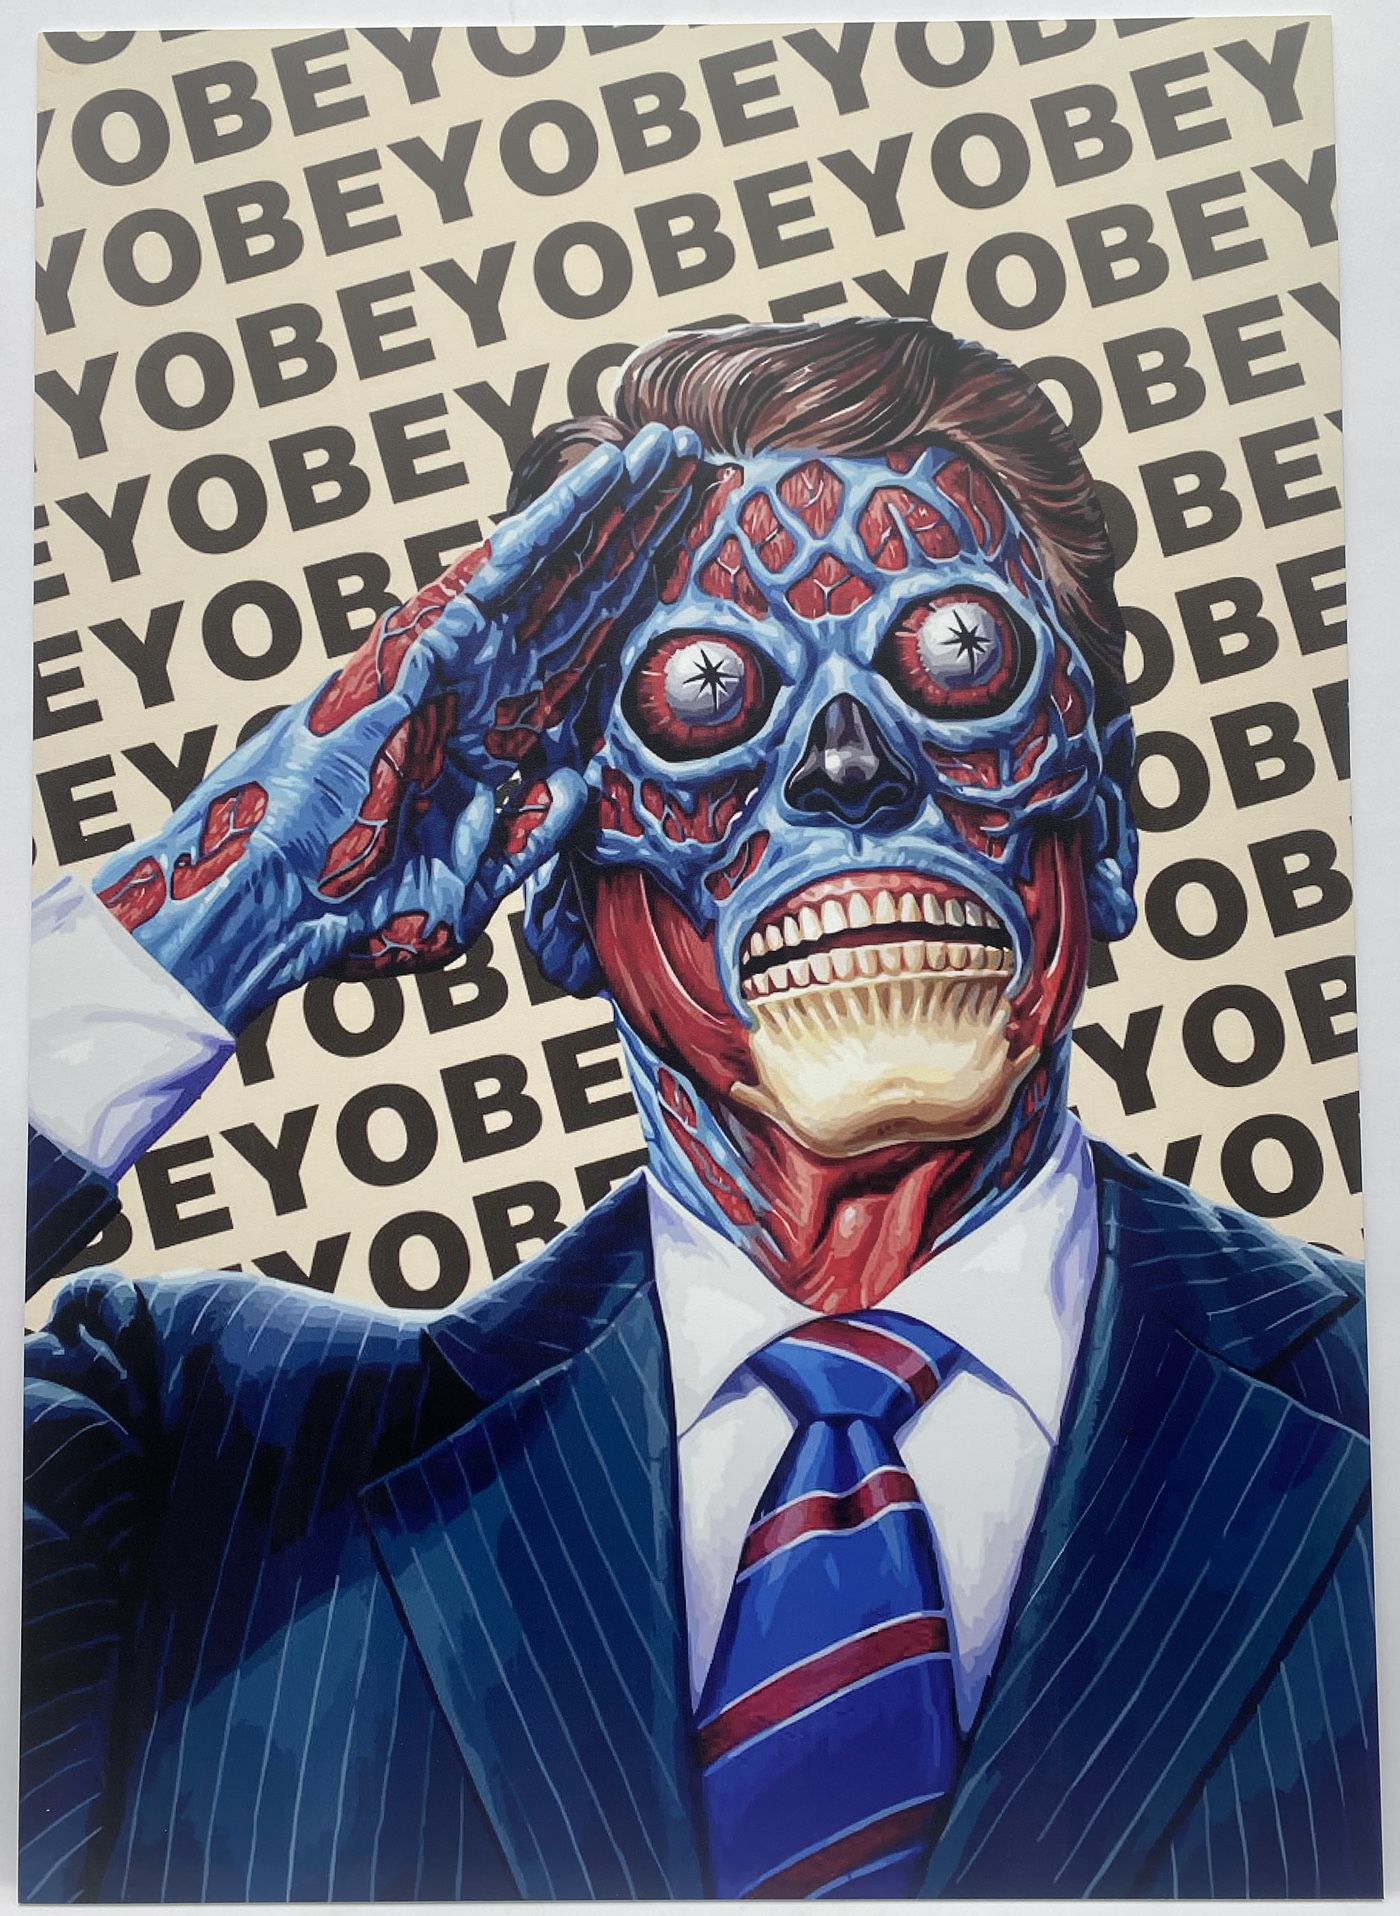 The Live OBEY - Movie Poster Illustration - 21.75” Wide x 30.75” High